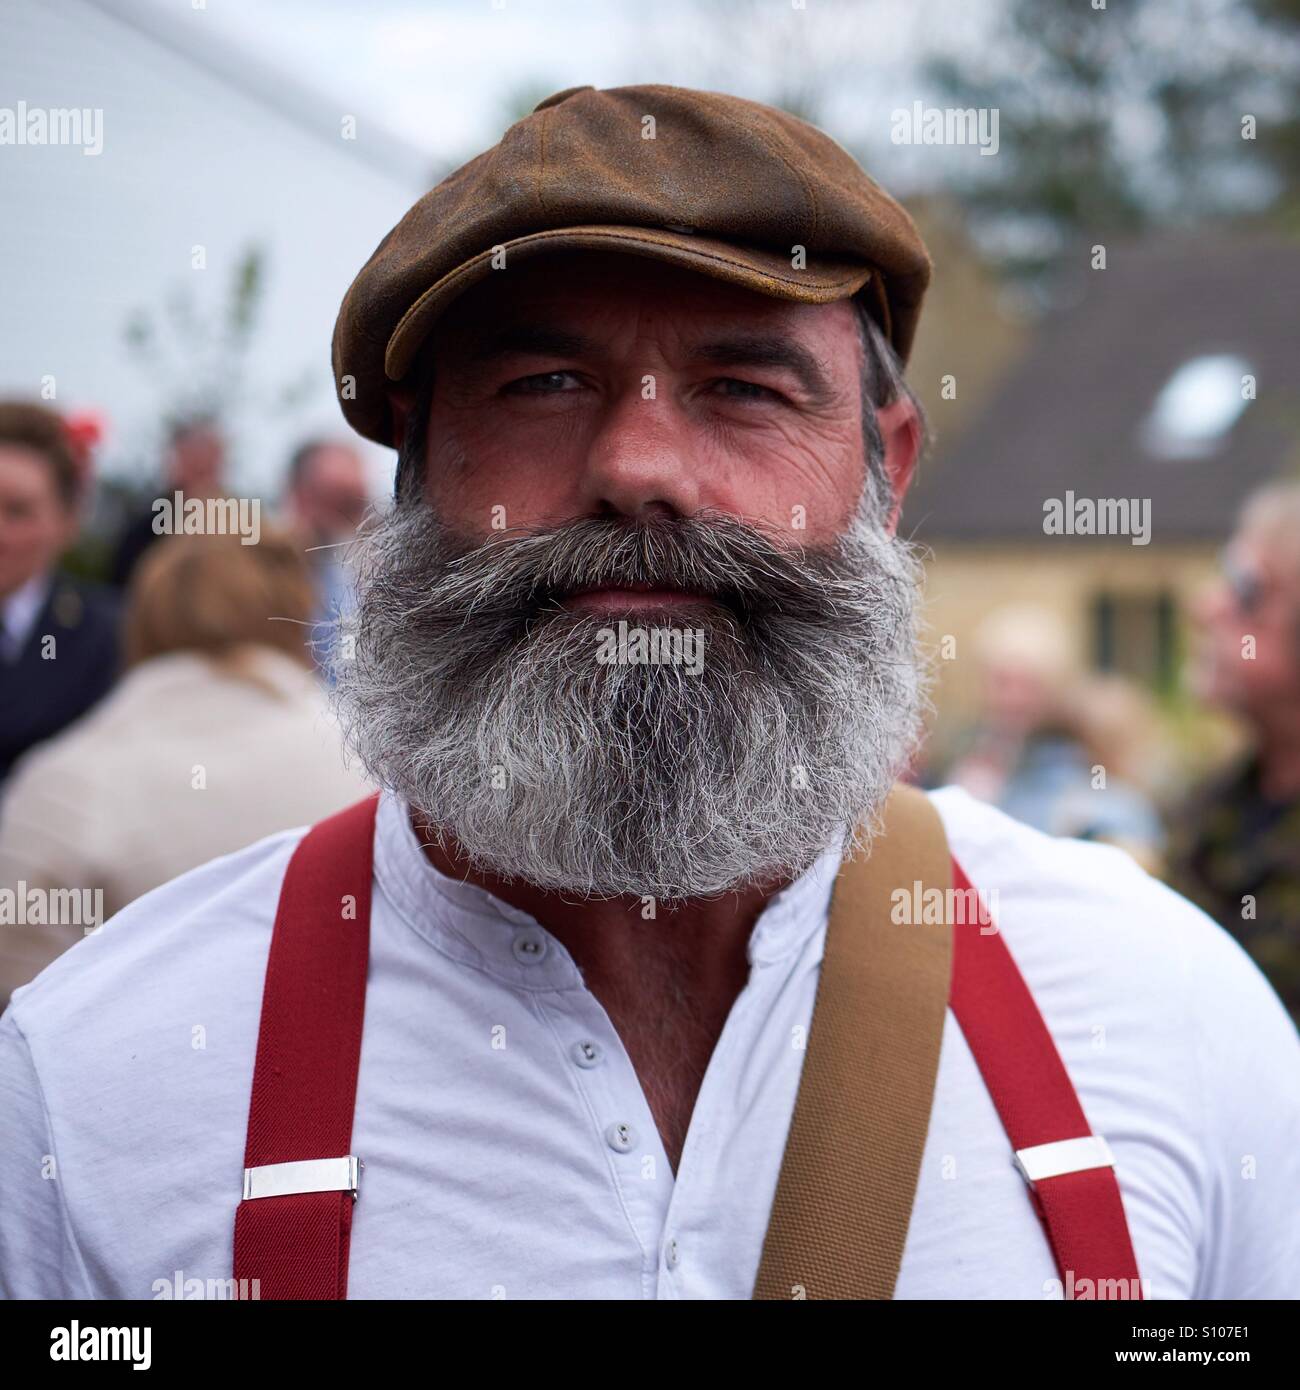 Portrait of a man with a substantial greying beard and flat cap wearing a grandad shirt and red braces. Stock Photo